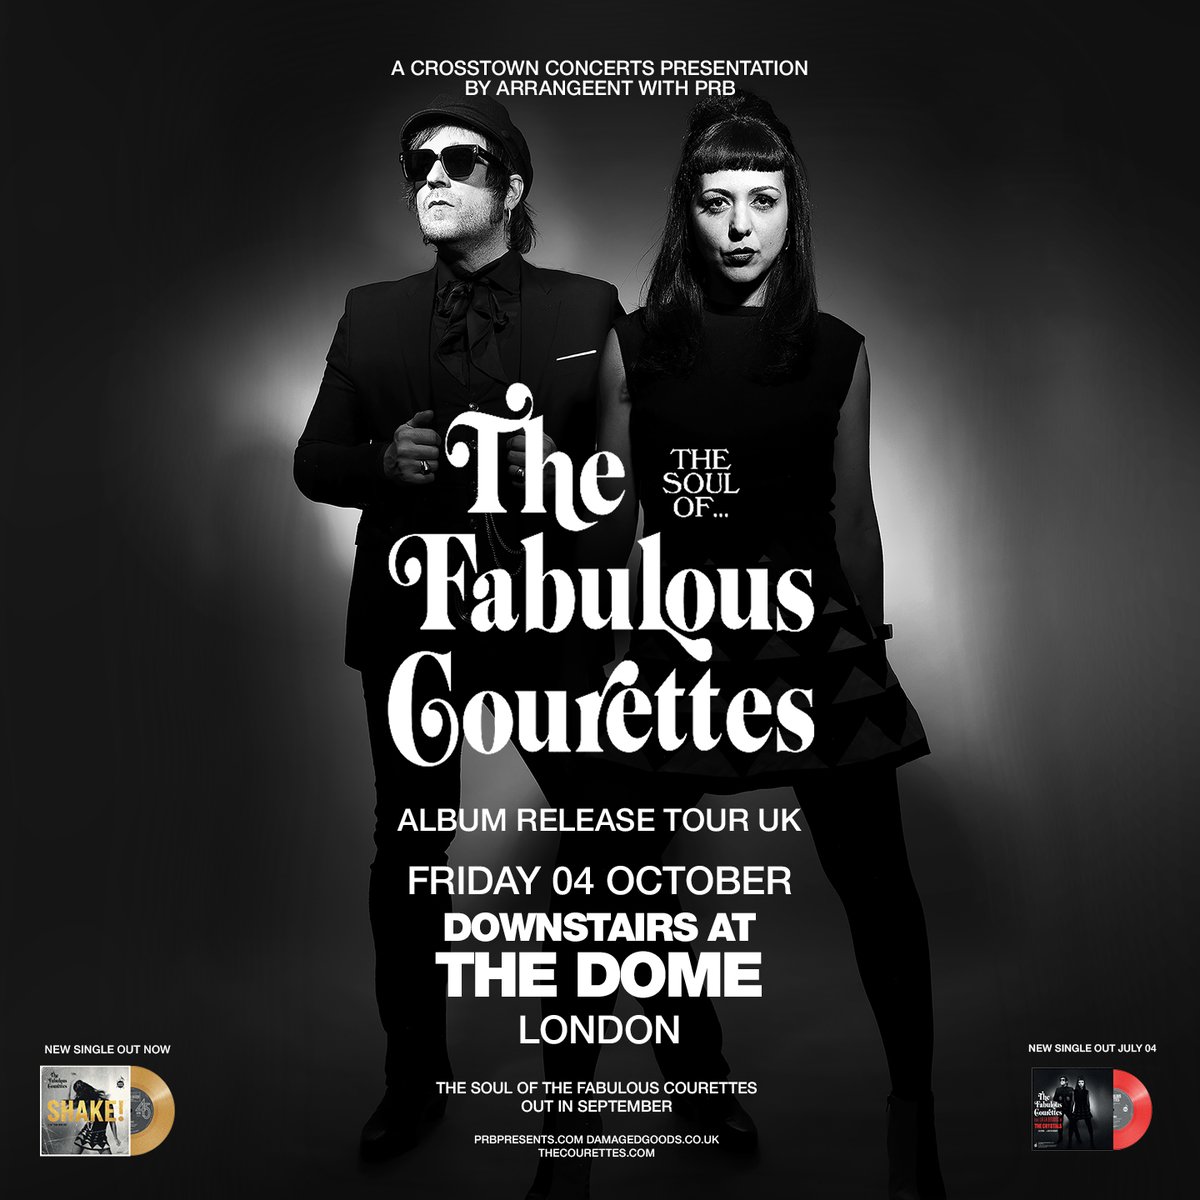 .@thecourettes play The Dome London on Friday 4th October. Tickets are on sale now: crosstownconcerts.seetickets.com/event/the-cour…